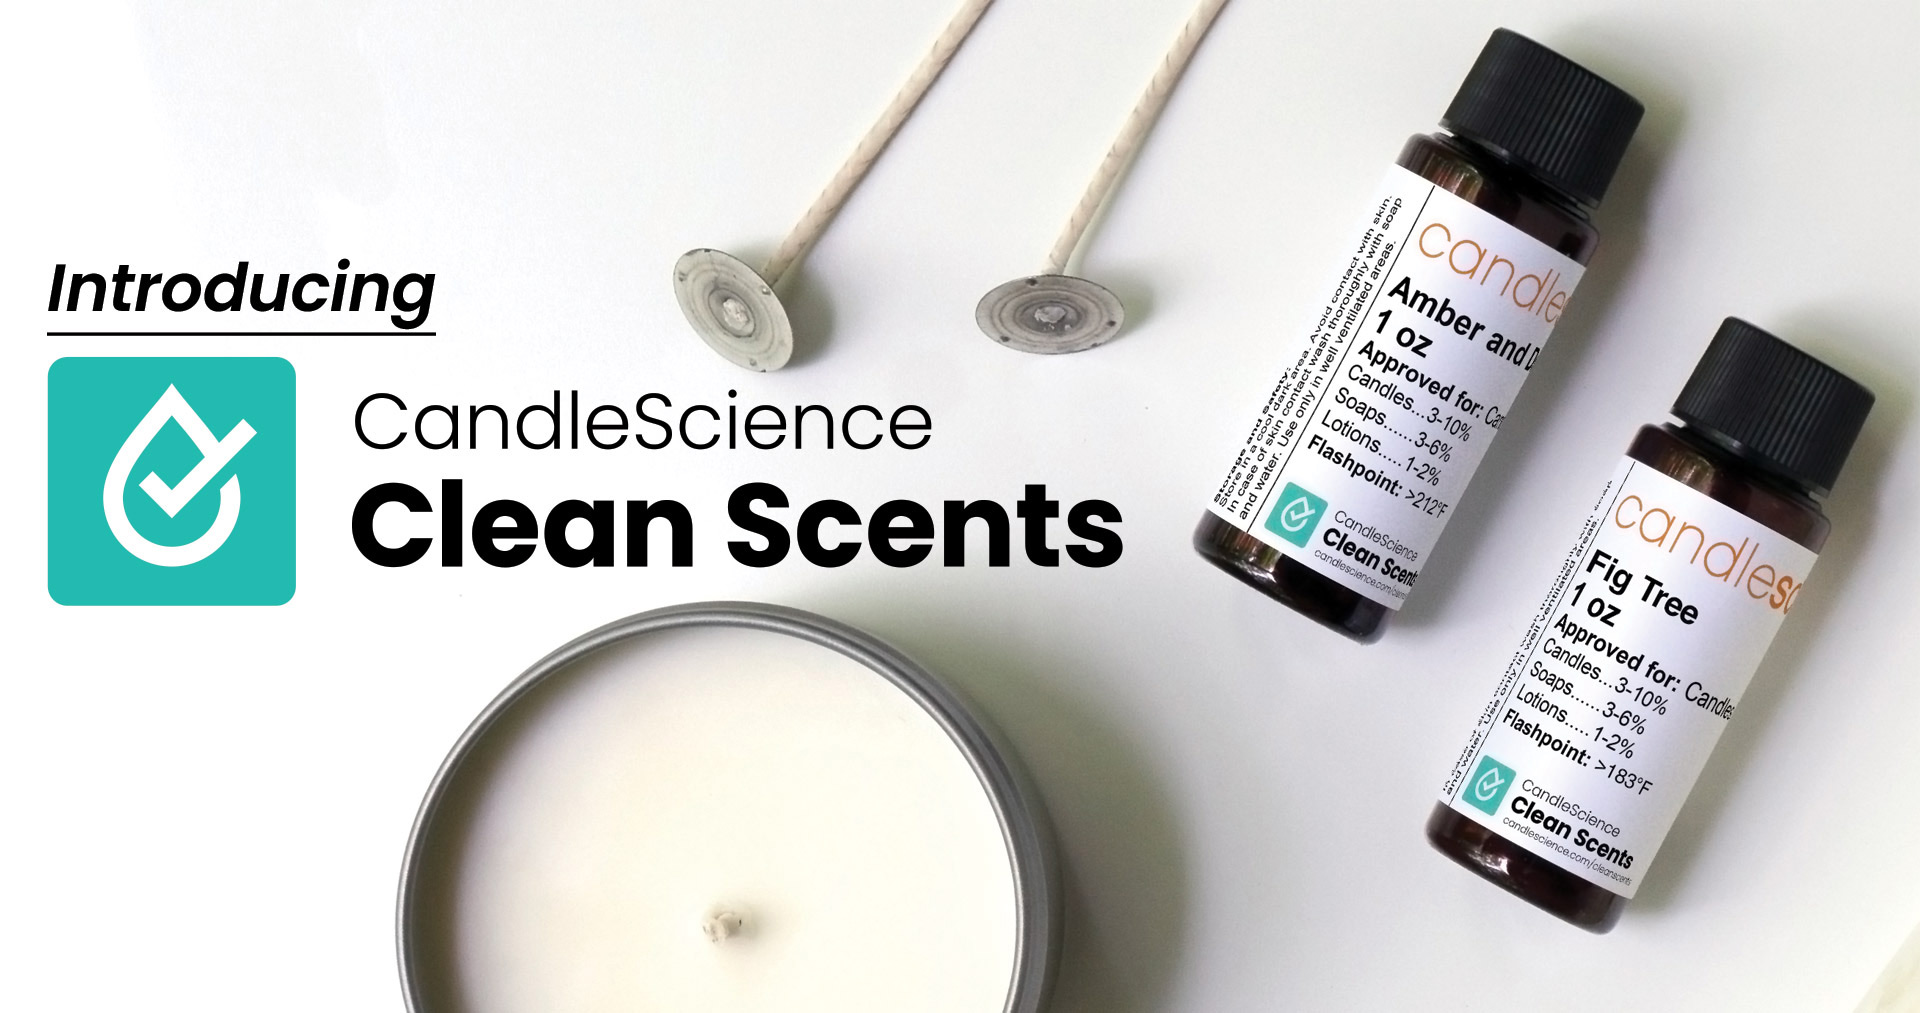 Wholesale Fragrance Oils for Candle Making and More - CandleScience  Candle  fragrance oil, Candle fragrance recipes, Soy candle fragrance